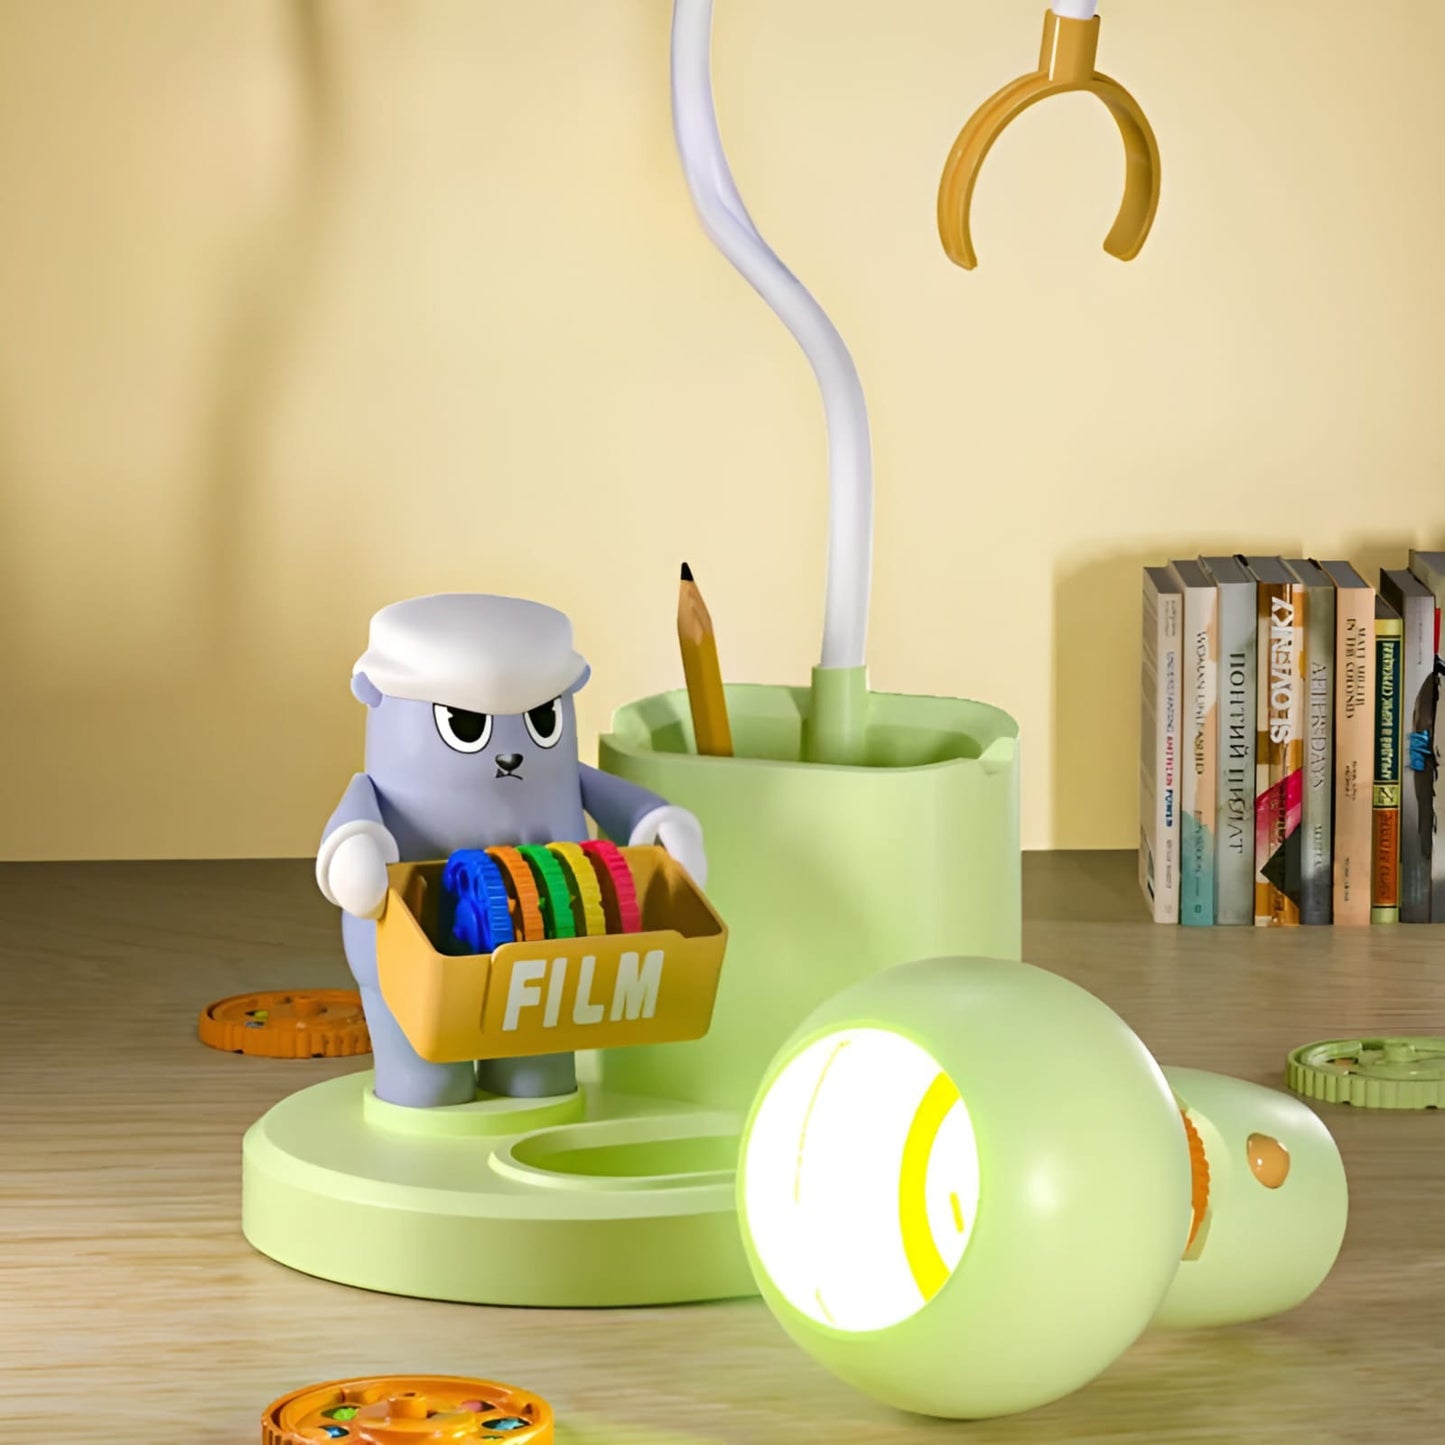 Mini Cartoon Projection Lamp, 5 Slides 40 Patterns, Study/Table/Desk Lamp with Pen / Pencil Holder, Educational Toy & Gift for Kids